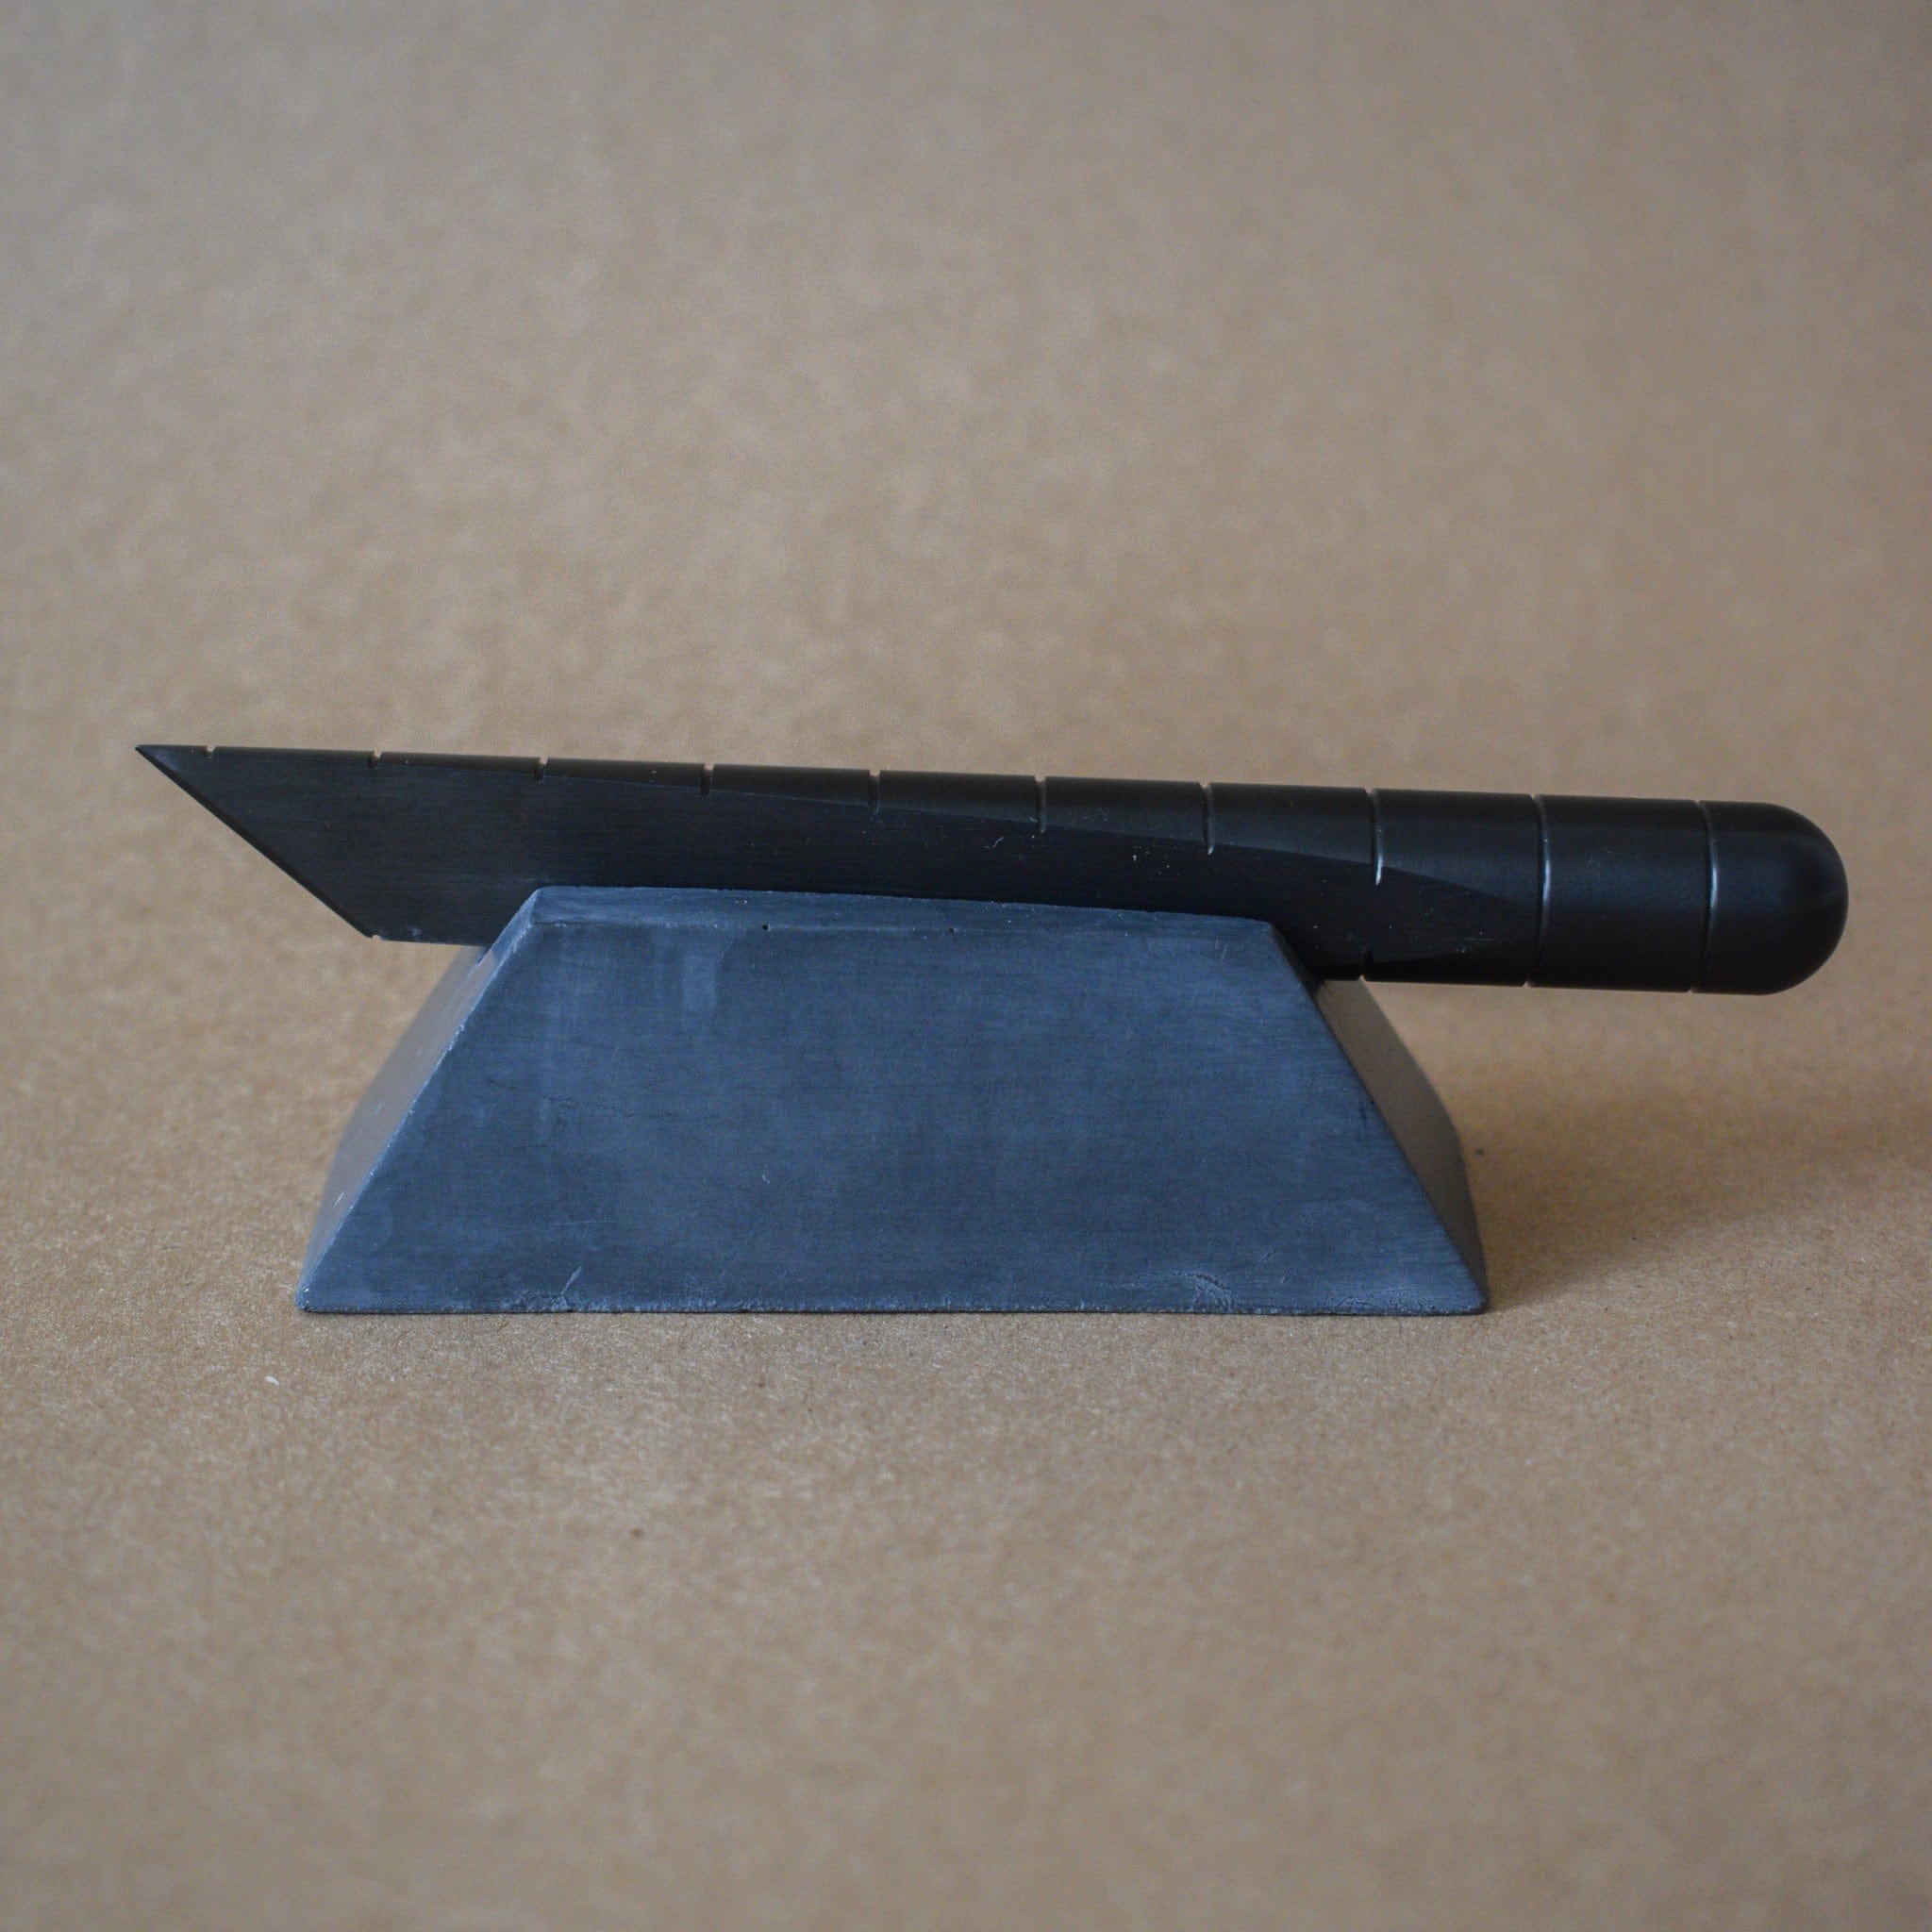 CRAIGHILL Accessories Black with Black Plinth Desk Knife